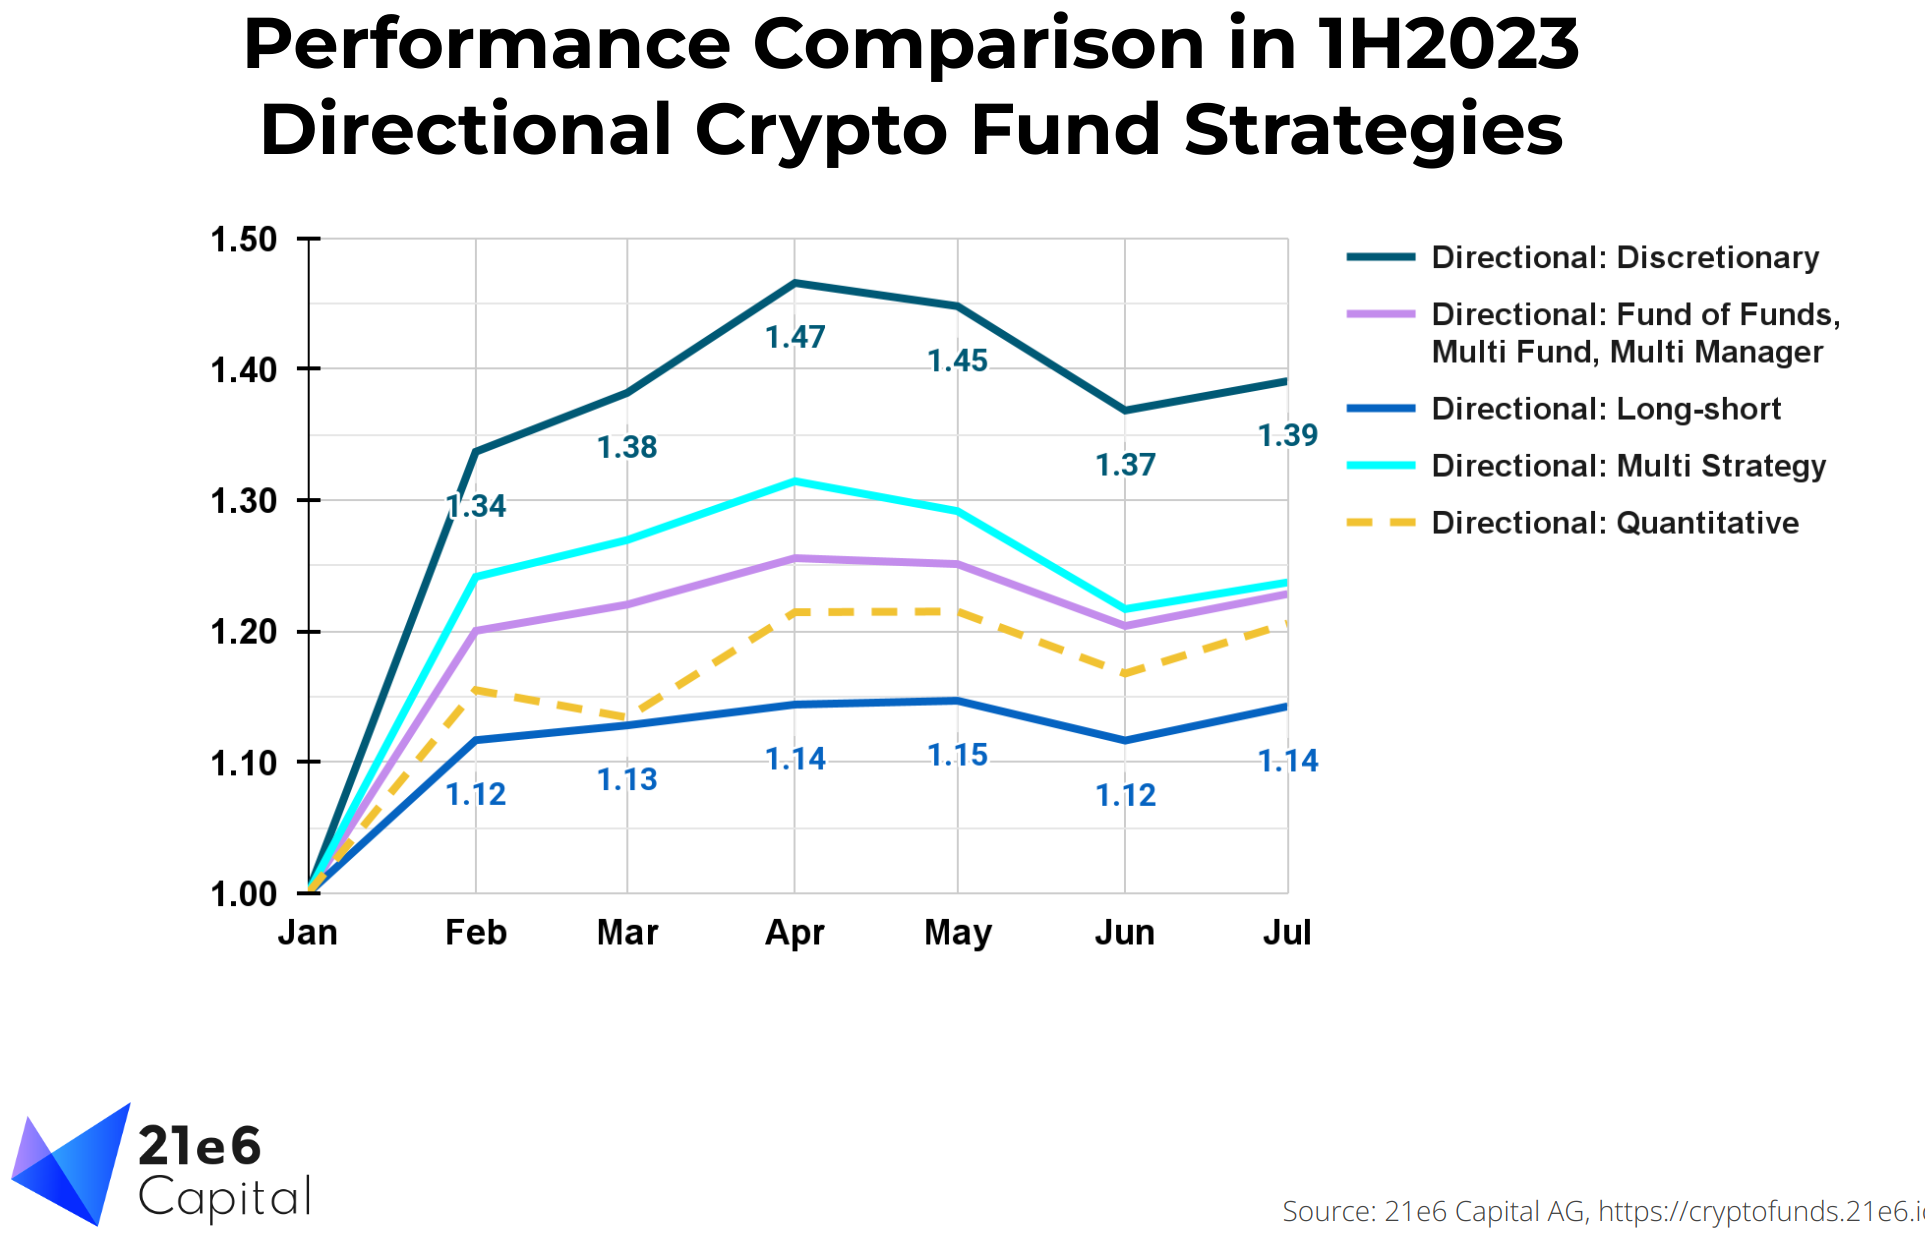 Comparing performance of directional fund strategies in 1H2023.